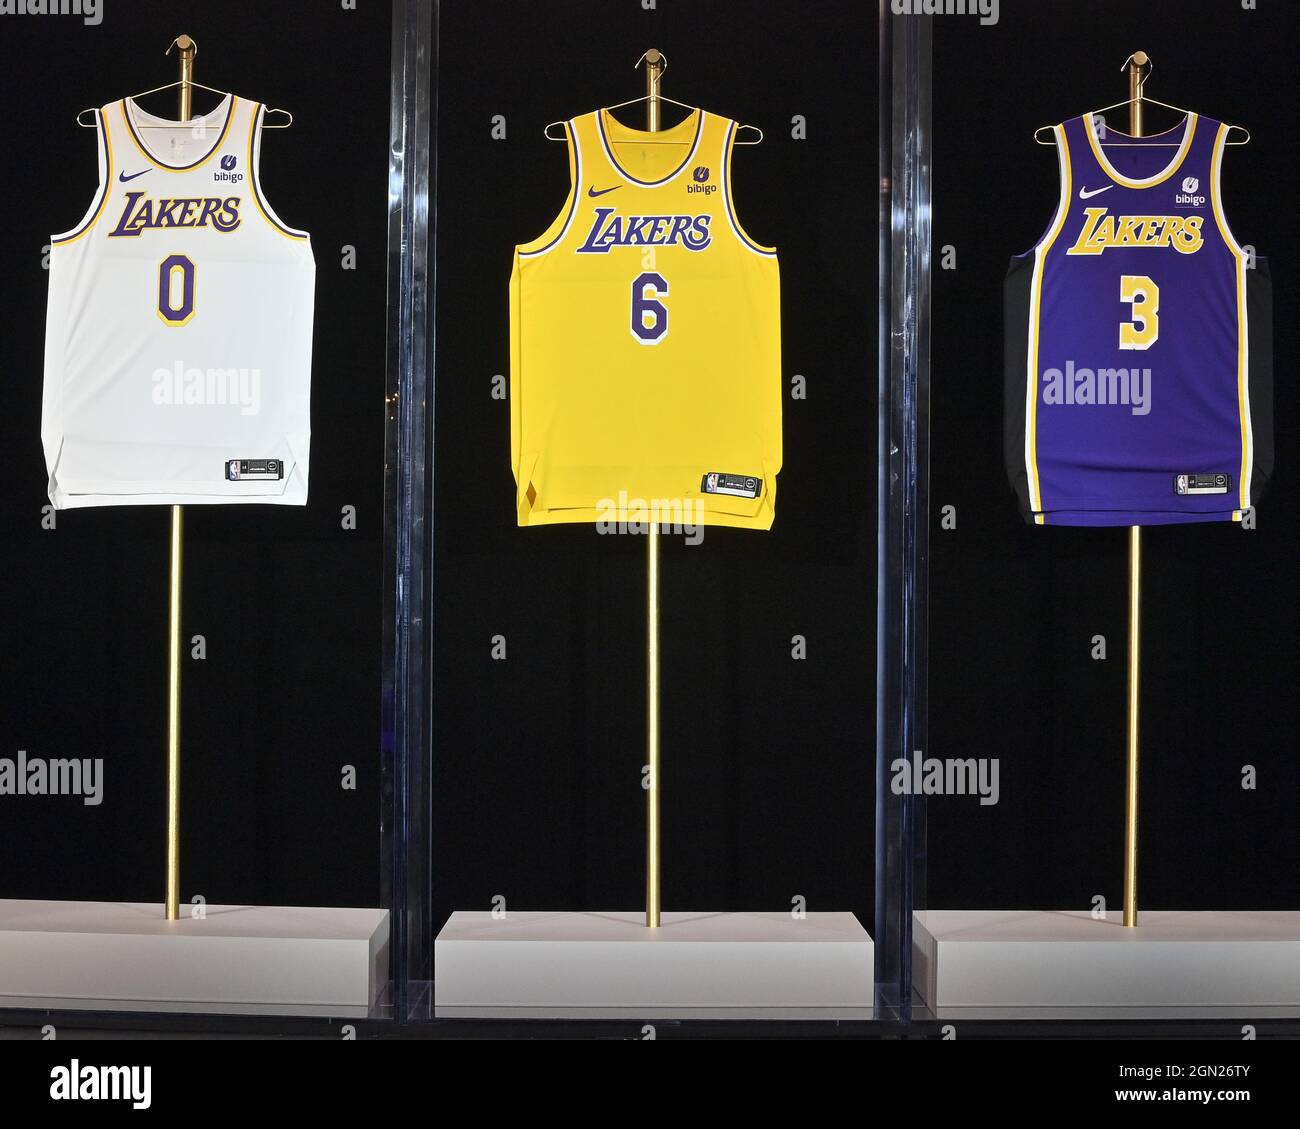 New Los Angeles Lakers' jerseys with a Bibigo patch are displayed during the team's kick-off event to announce a new global marketing partnership with Bibigo, a popular South Korean food company at the UCLA Health Training Center in El Segundo, California on Monday, September 20, 2021. Ahead of the 2017-18 NBA season, the NBA put into action its patch program that allowed NBA teams to rent out a small square (2.5 inches by 2.5 inches) on the left shoulder of their jerseys to outside companies. The Lakers' $100 million partnership with Bibigo is now the largest jersey patch deal in the NBA. It' Stock Photo